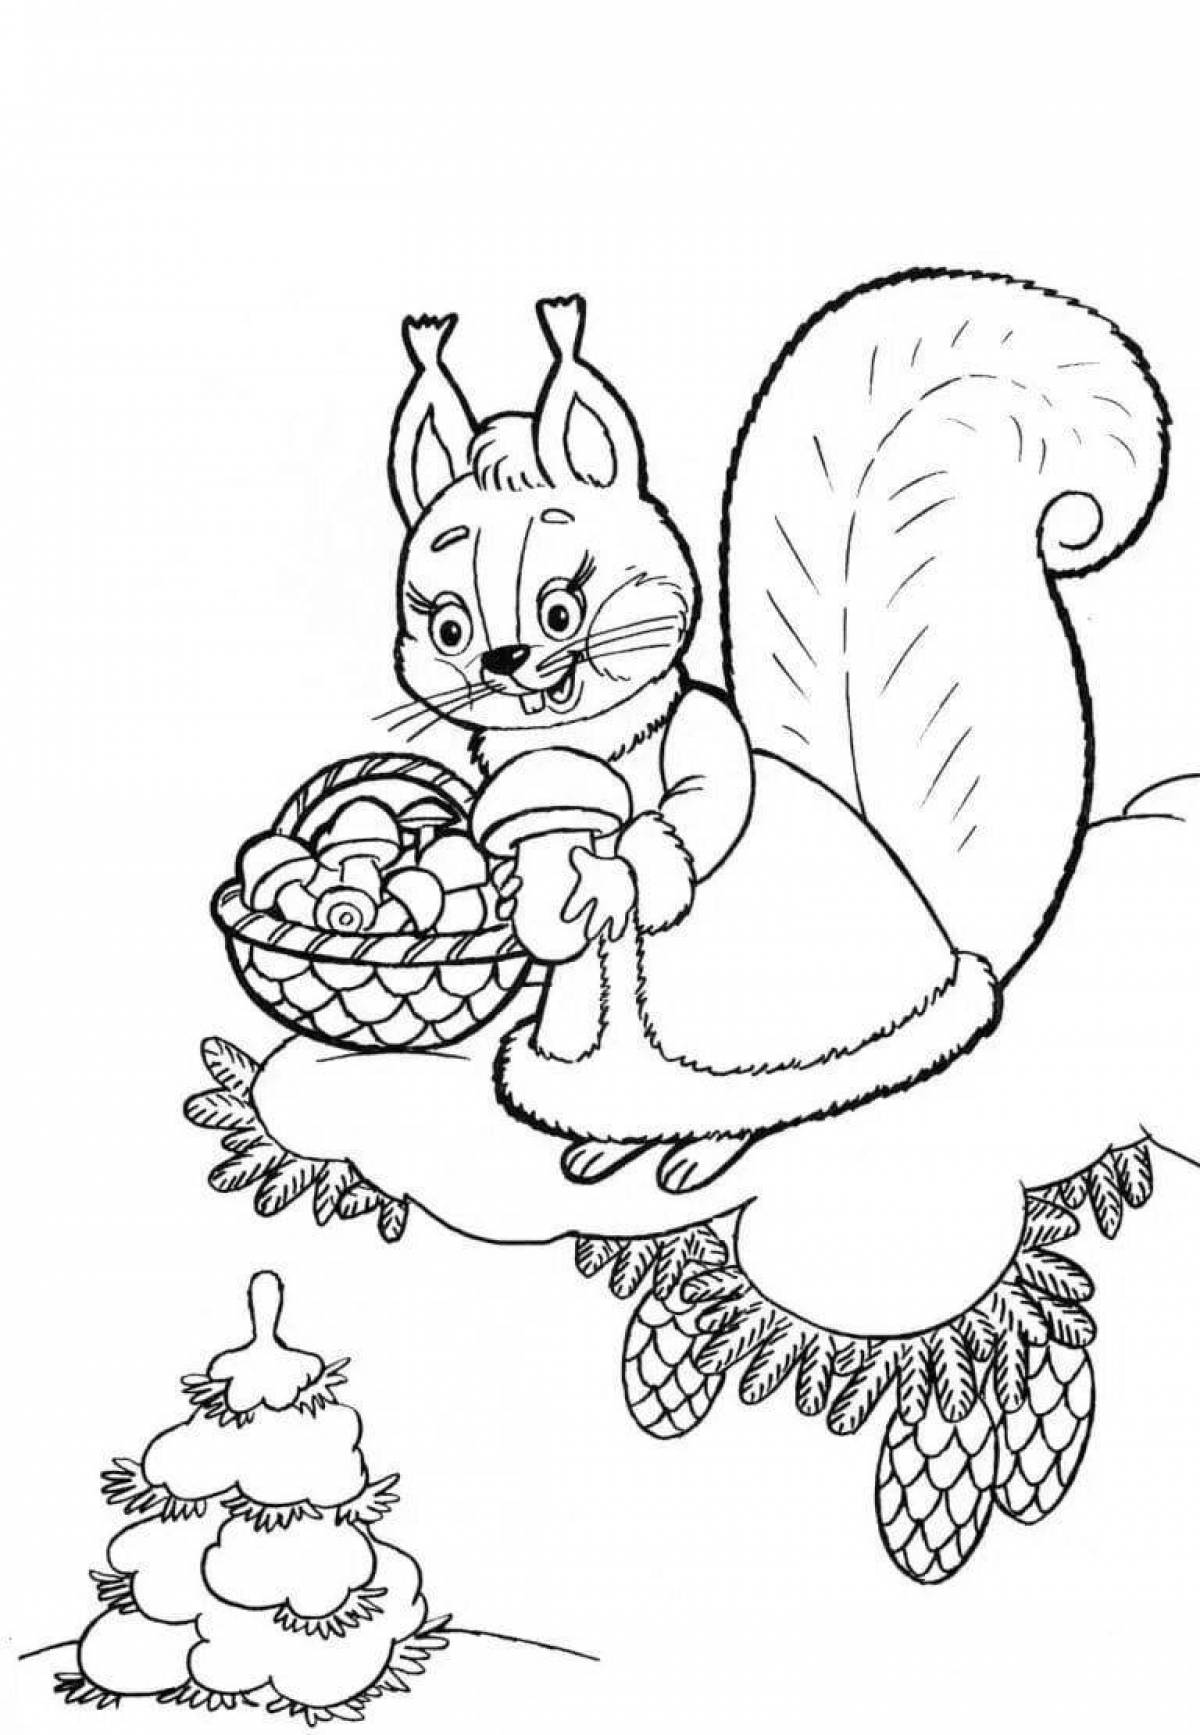 Majestic winter squirrel coloring page